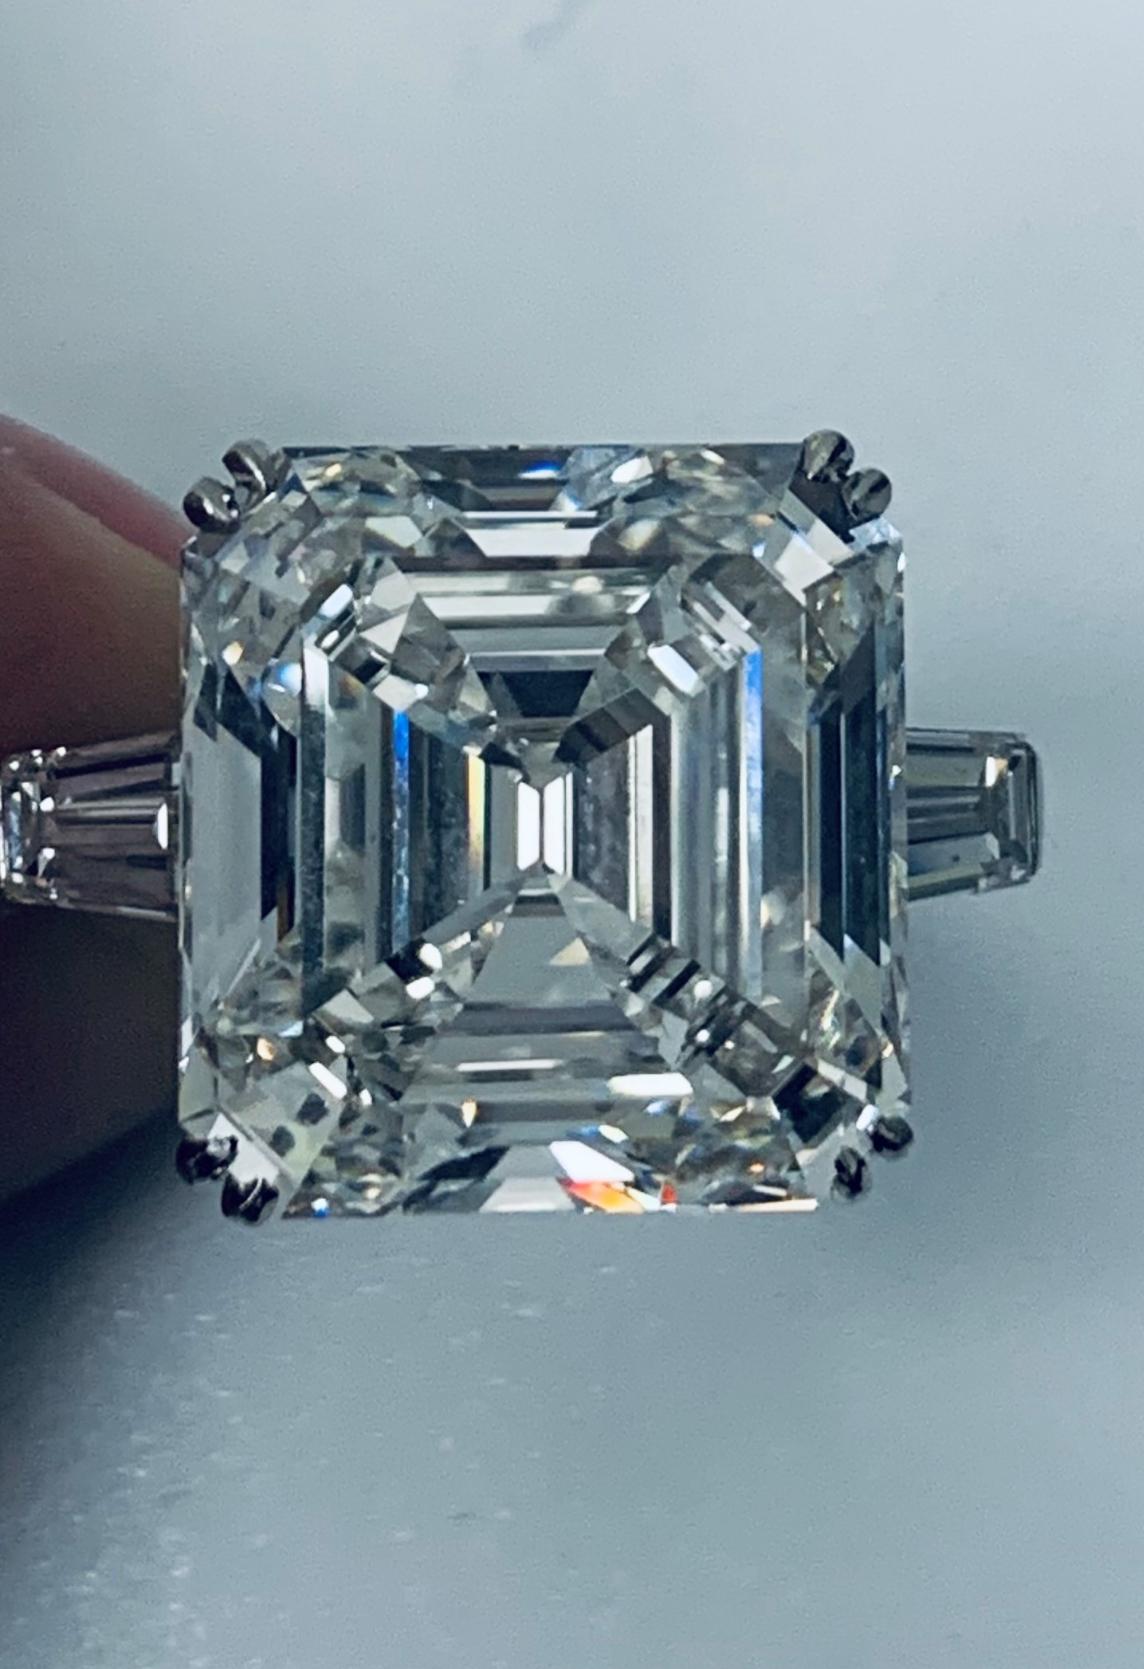 Emerald Cut Diamond weighing 22 Carats certified by GIA as H color and VS clarity
Flanked by tapered baguettes. 
Set in platinum. 